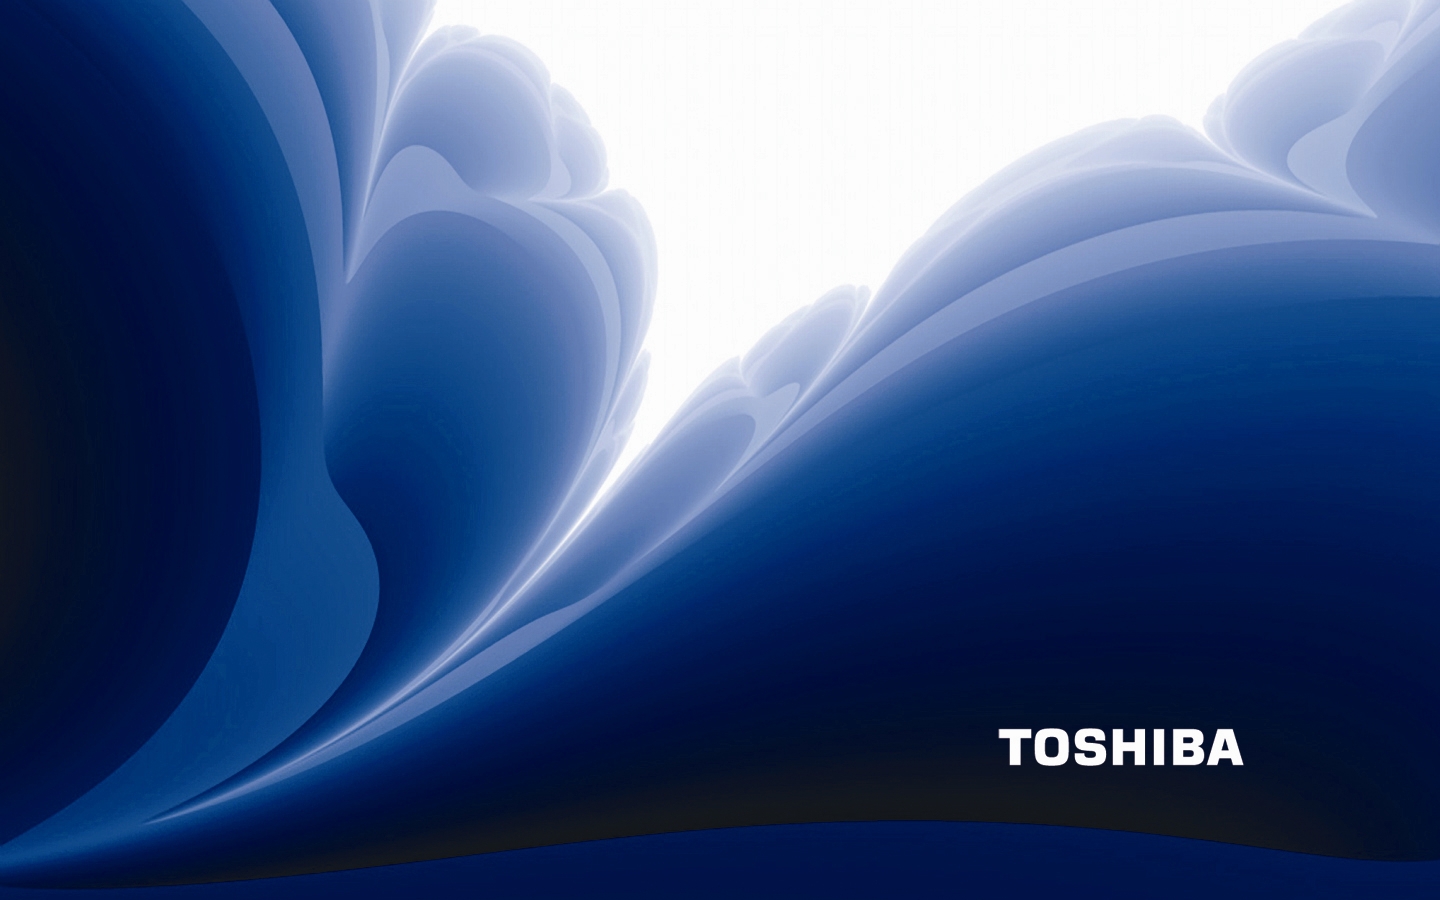 toshiba background pictures #13